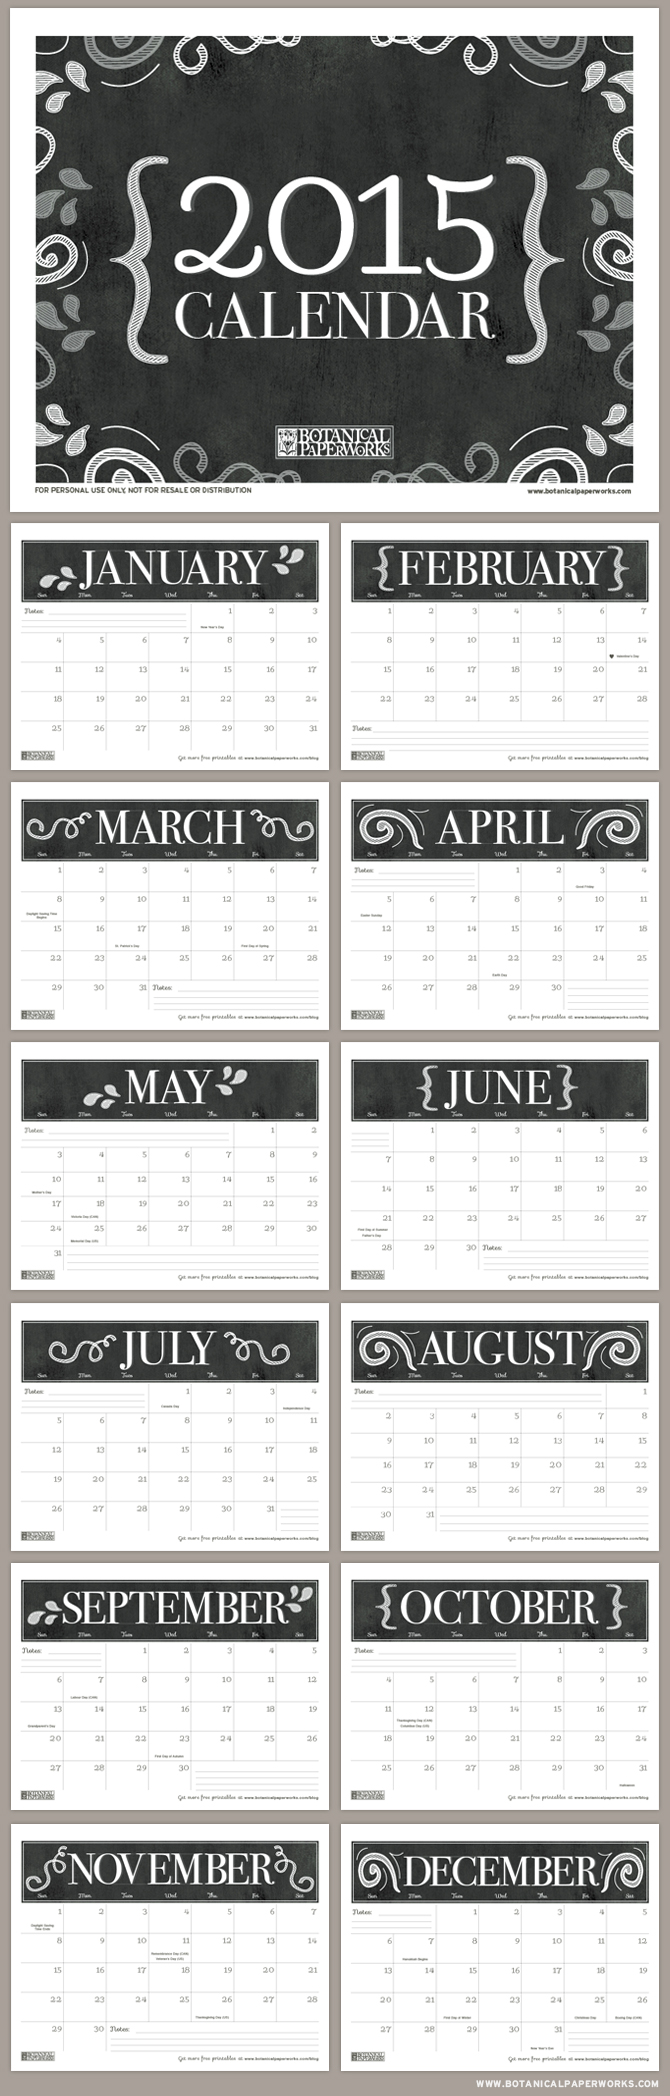 Get organized with this handy chalkboard style FREE printable calendar for 2015.